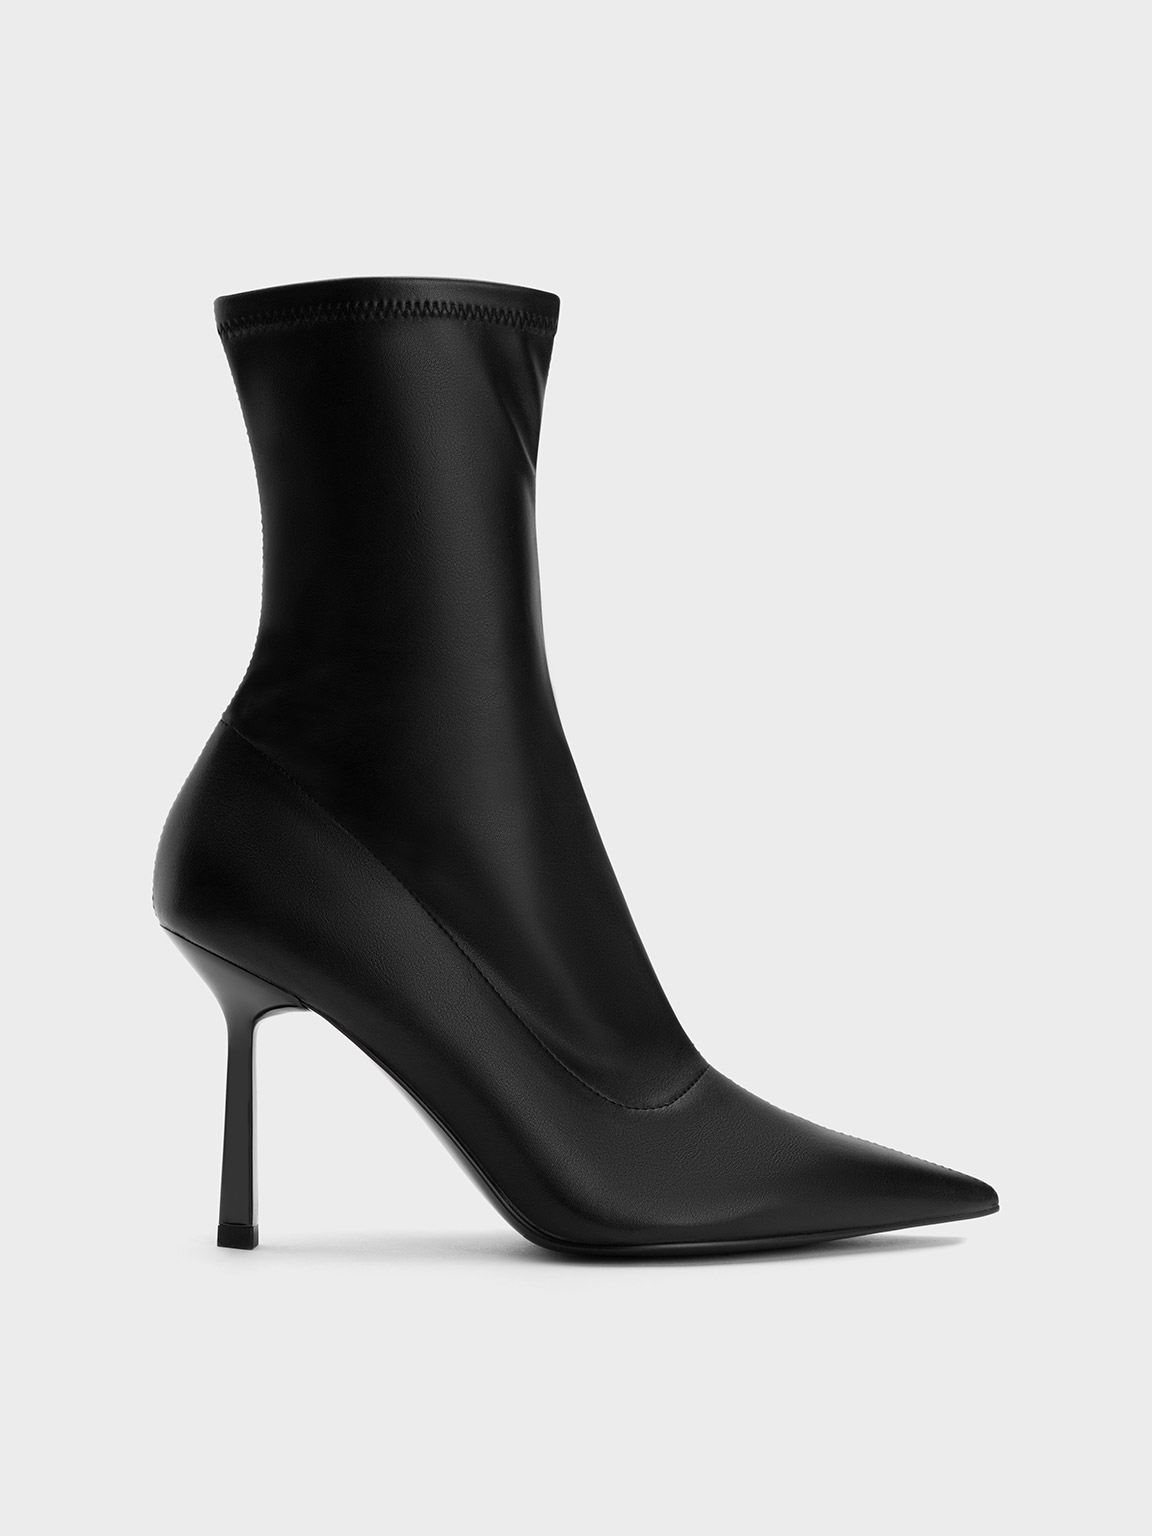 Black Pointed-Toe Stiletto Heel Ankle Boots | CHARLES & KEITH